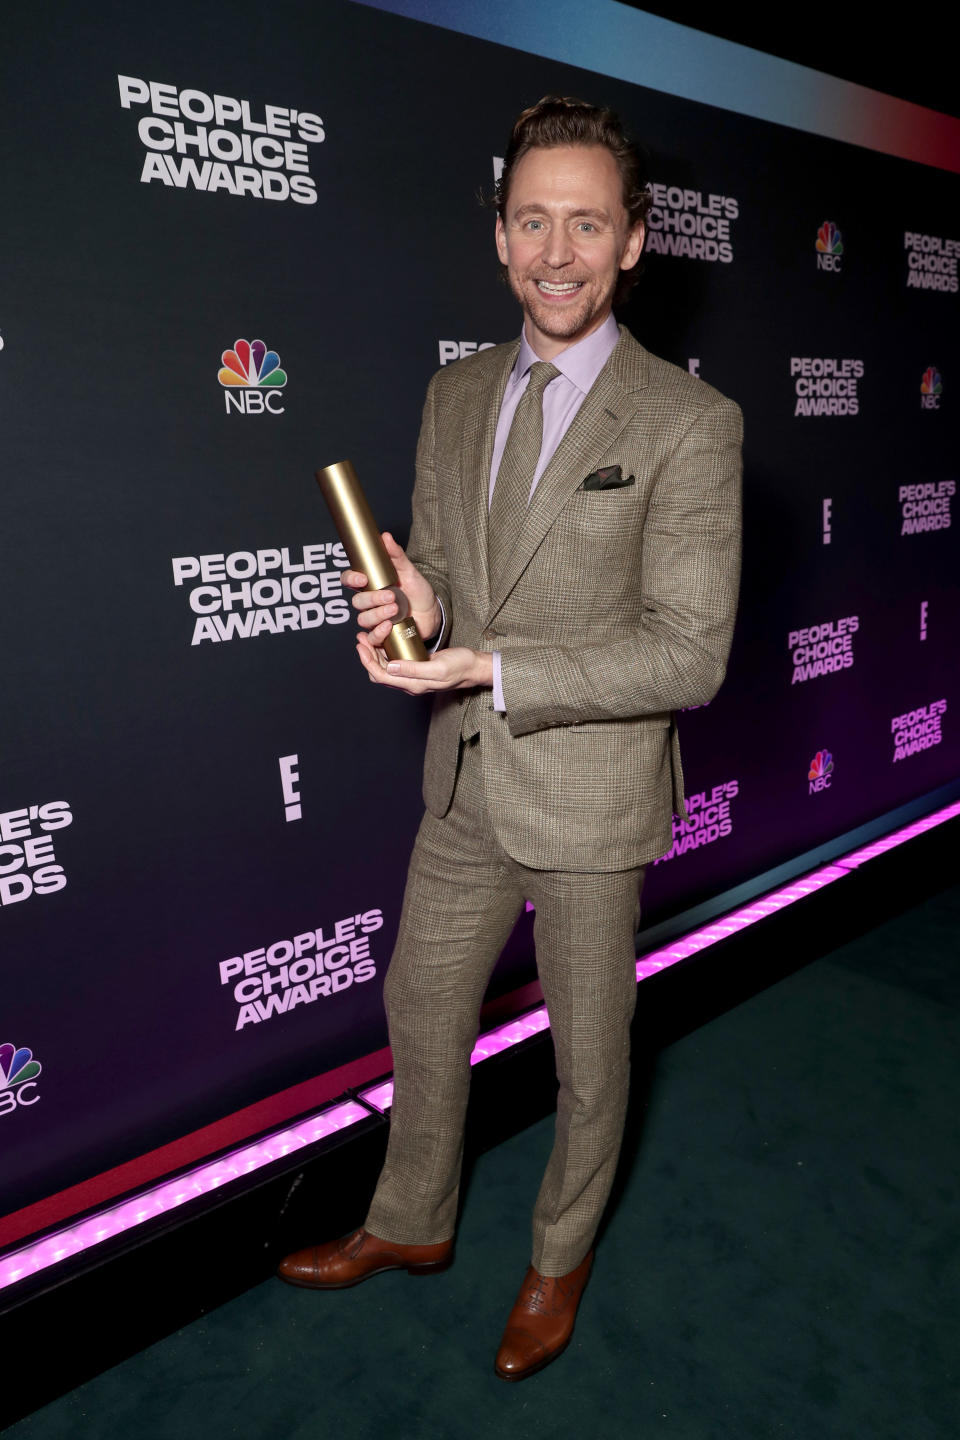   Todd Williamson / NBCUniversal/NBCU Photo Bank via Getty Images